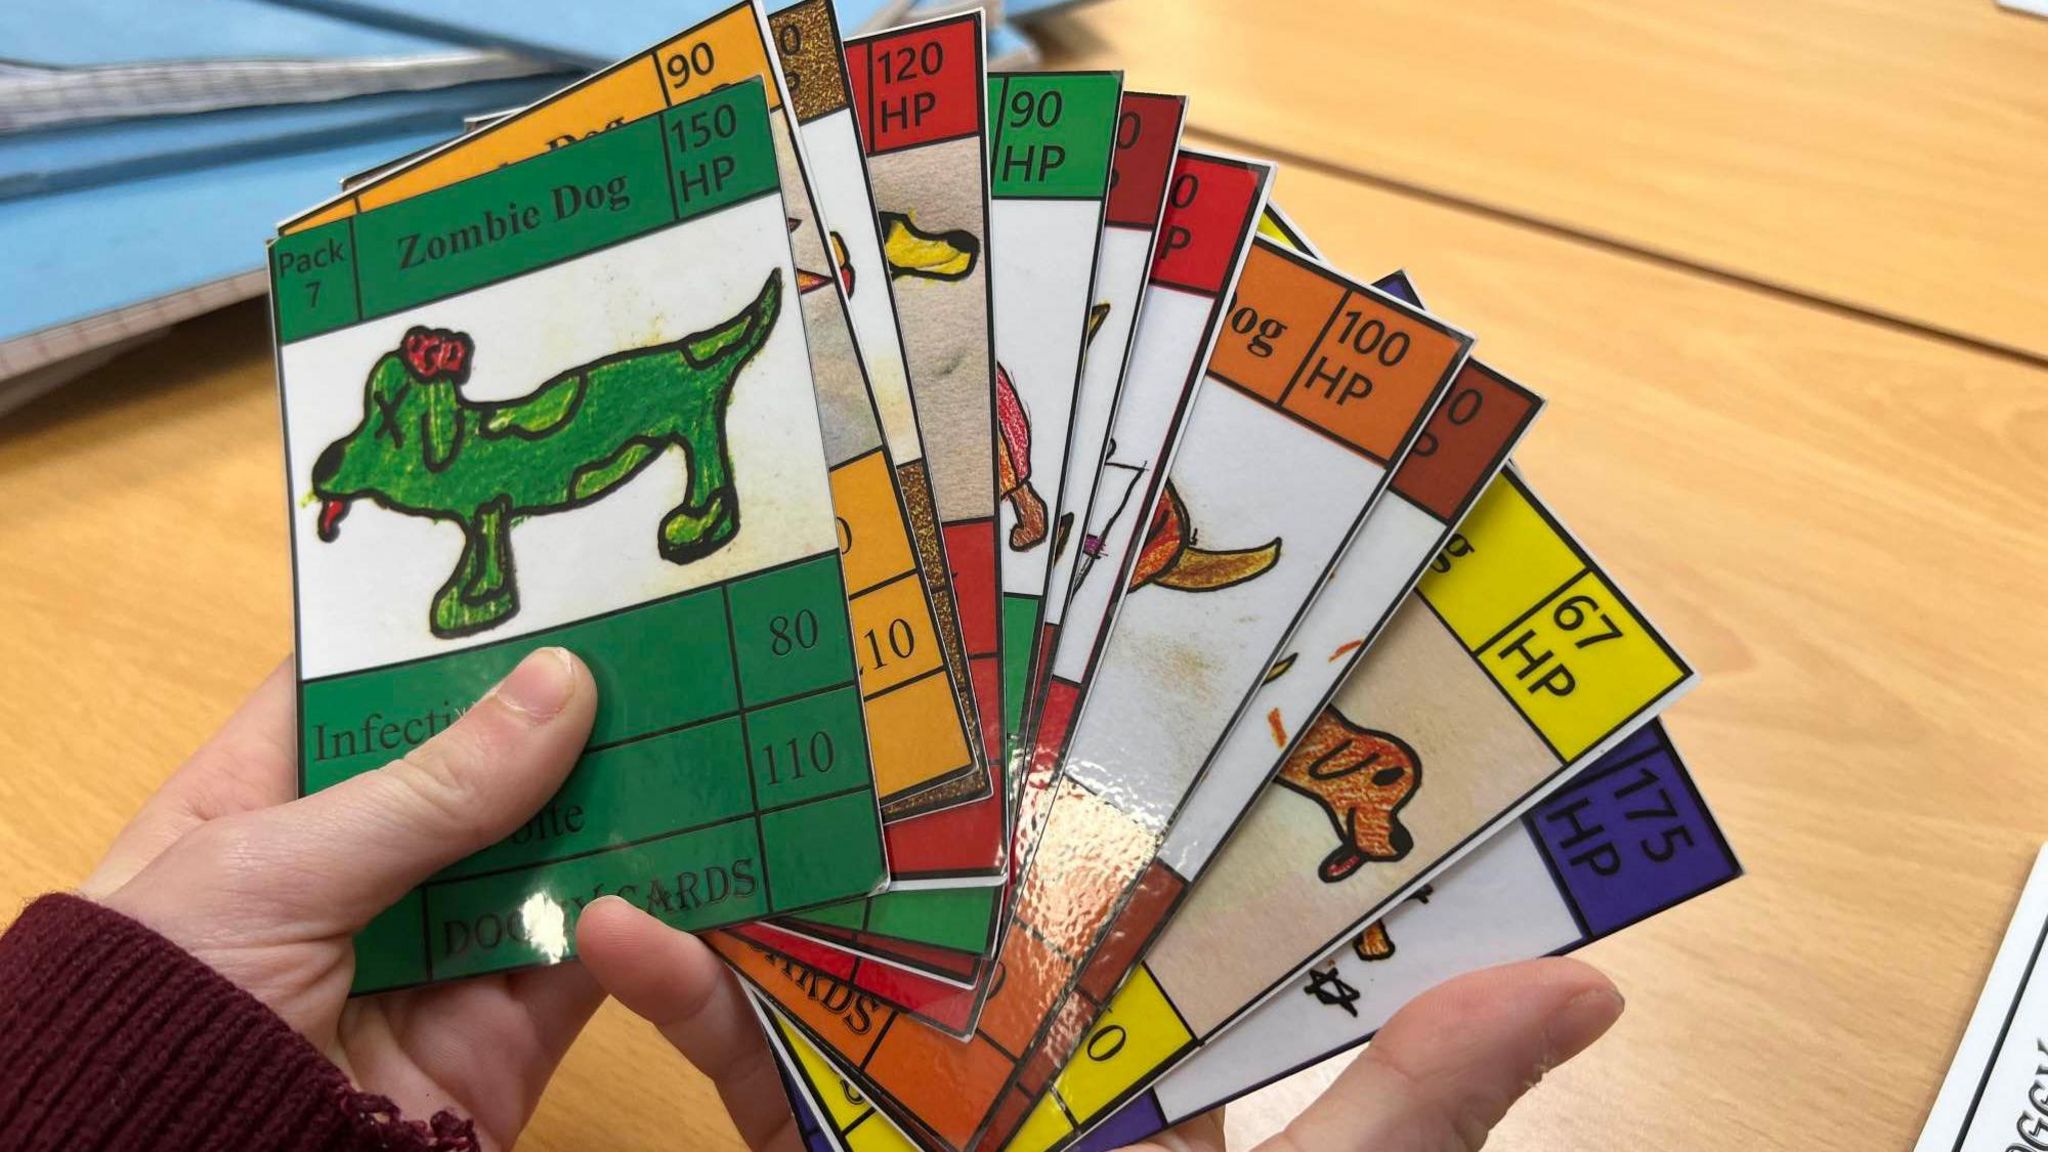 A close up of the cards, one of which has the title 'Zombie Dog' and shows a green, ill looking animal